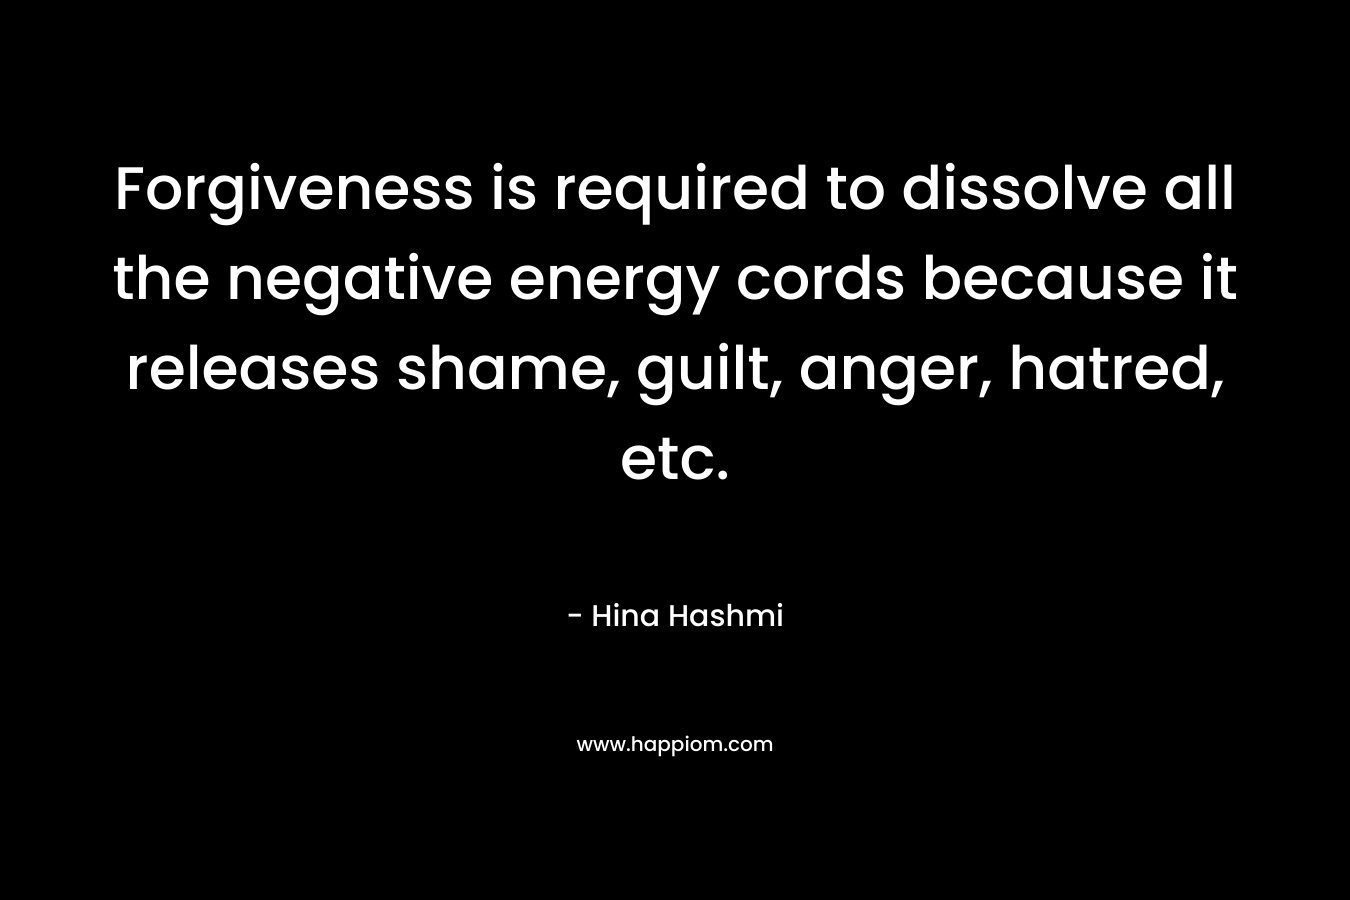 Forgiveness is required to dissolve all the negative energy cords because it releases shame, guilt, anger, hatred, etc.